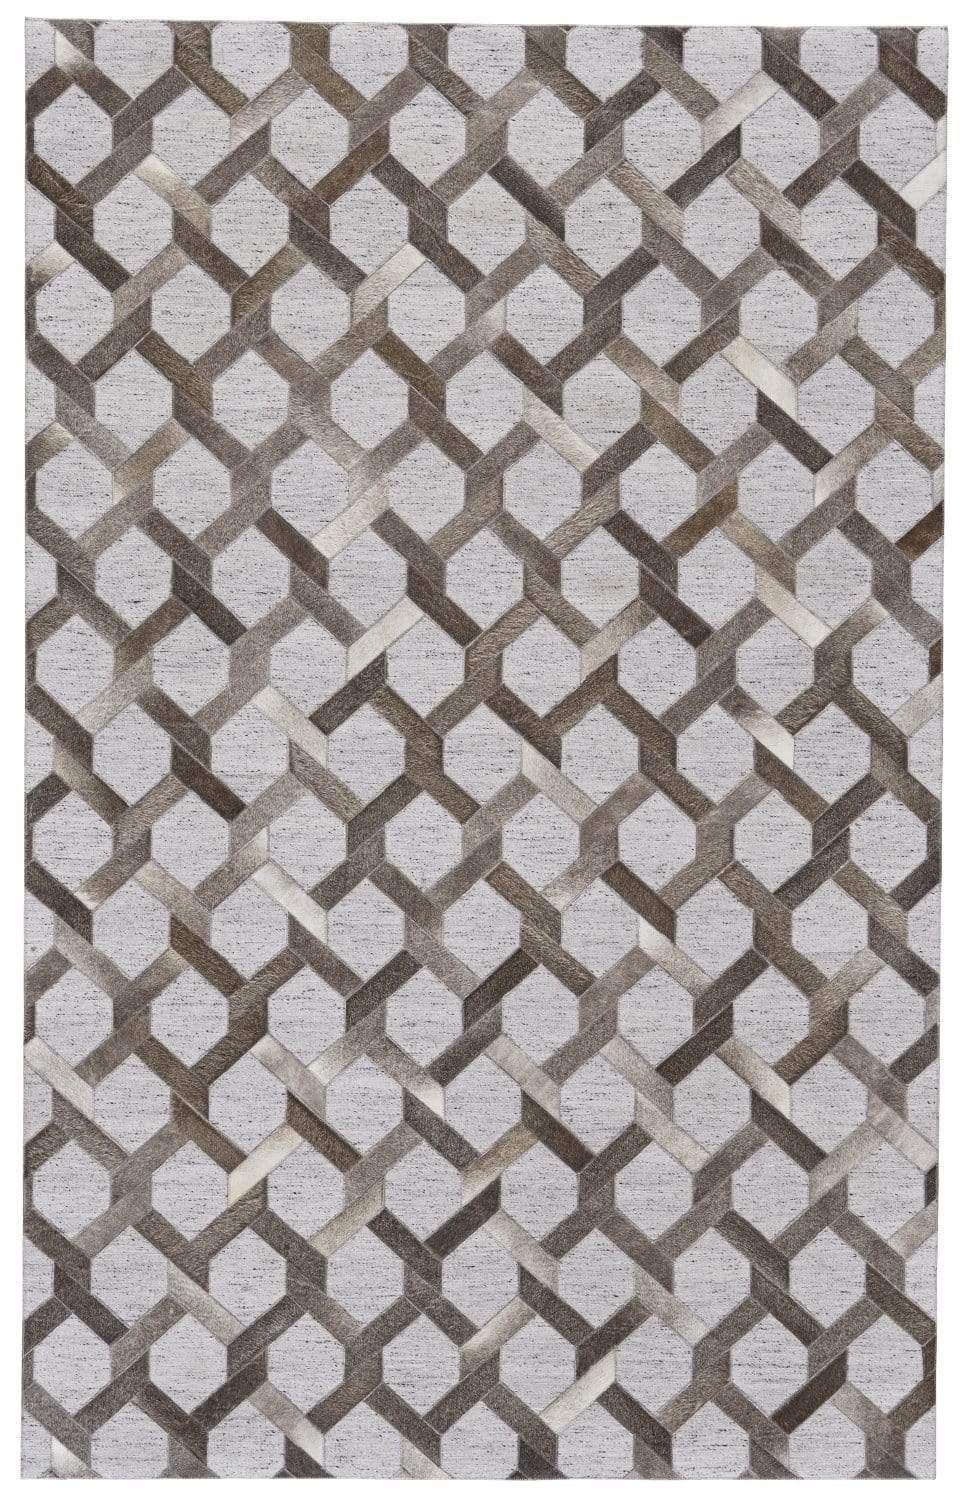 Feizy Feizy Fannin Handmade Leather Trellis Rug - Gray & Warm Taupe - Available in 4 Sizes 5' x 8' 7380752FSTLSTME10